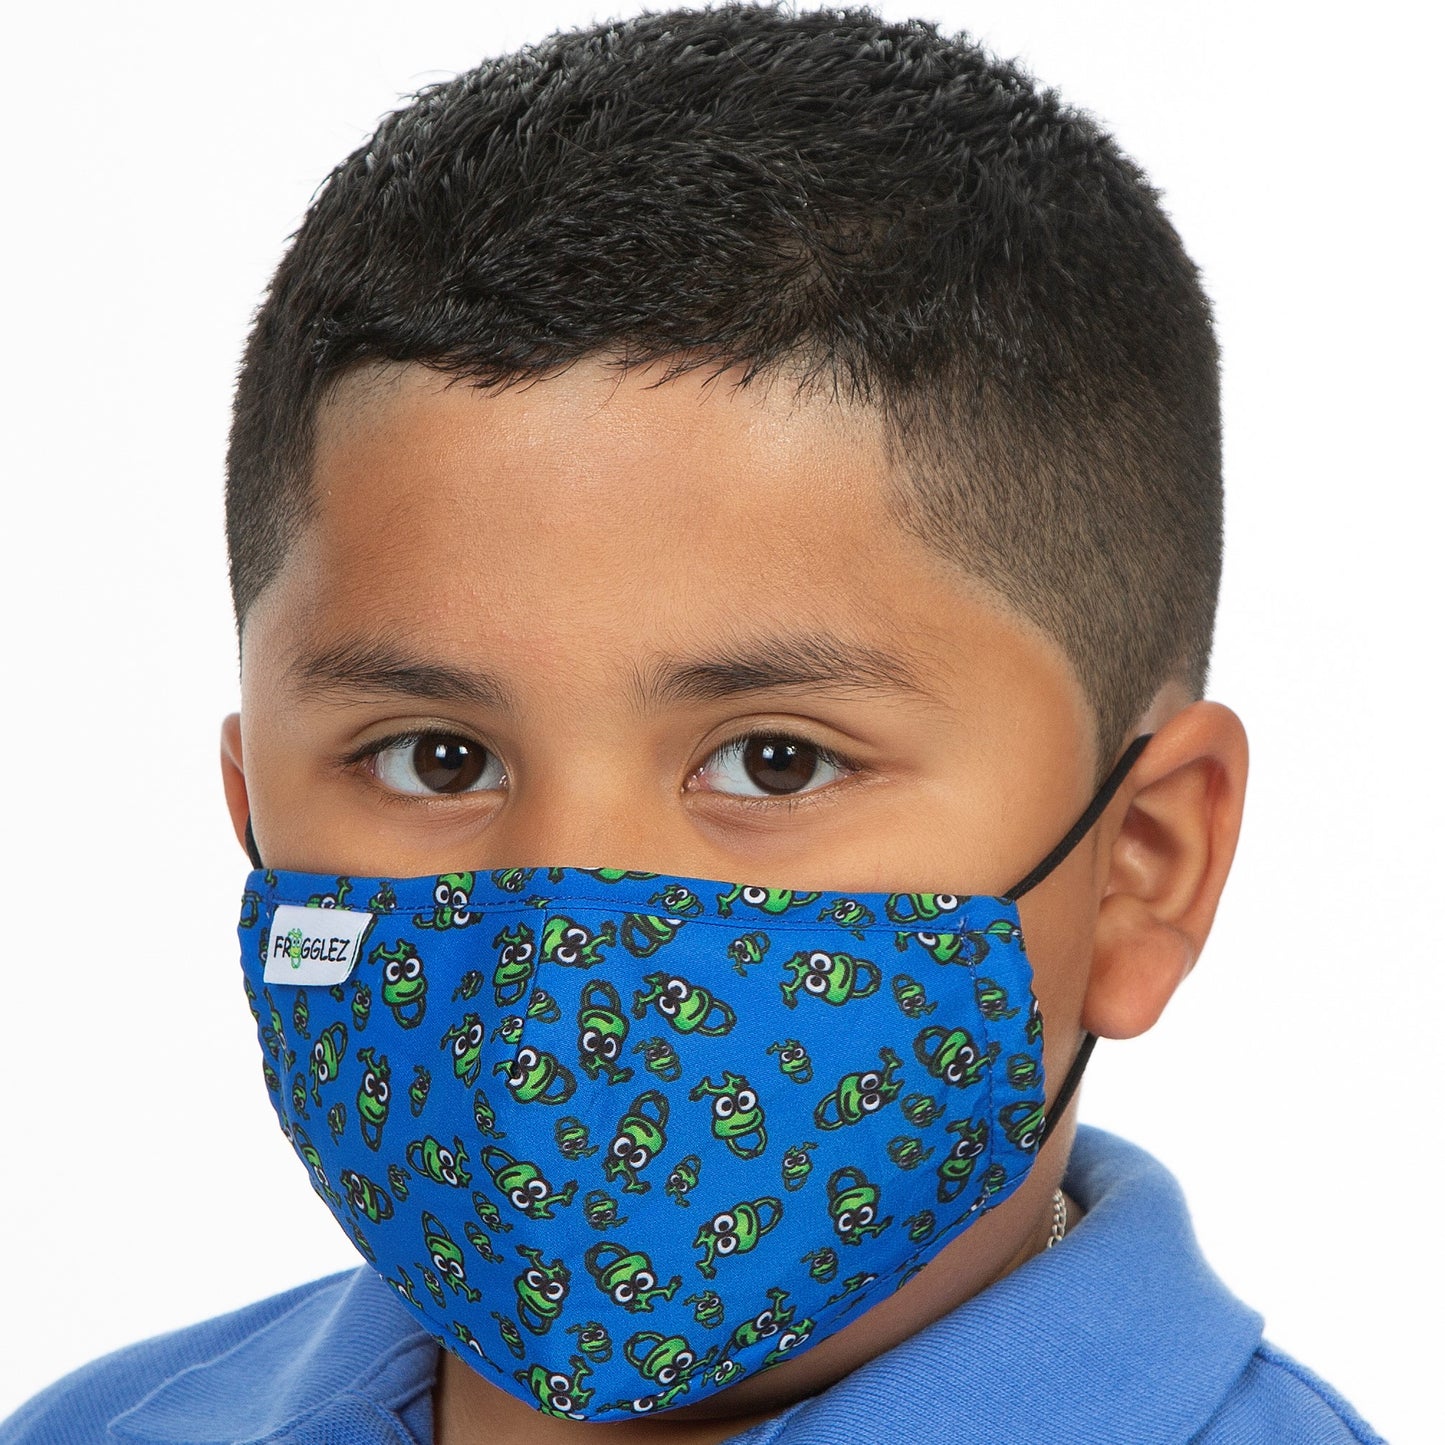 Boy wearing blue cloth face mask with frog print